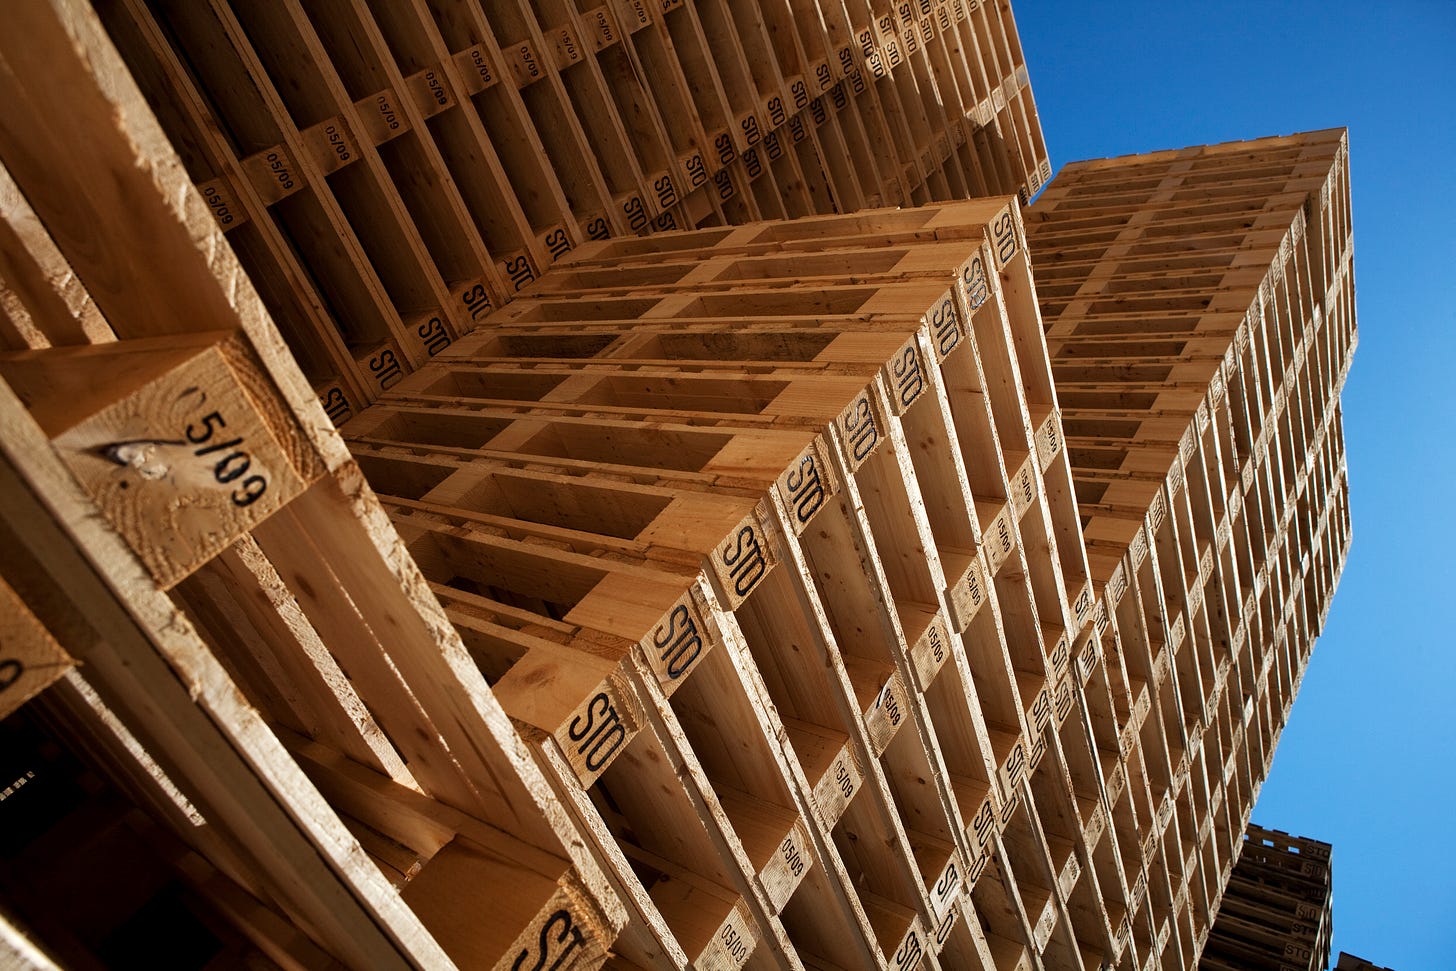 Multilevel stacks of wood pallets under a cloudless blue sky